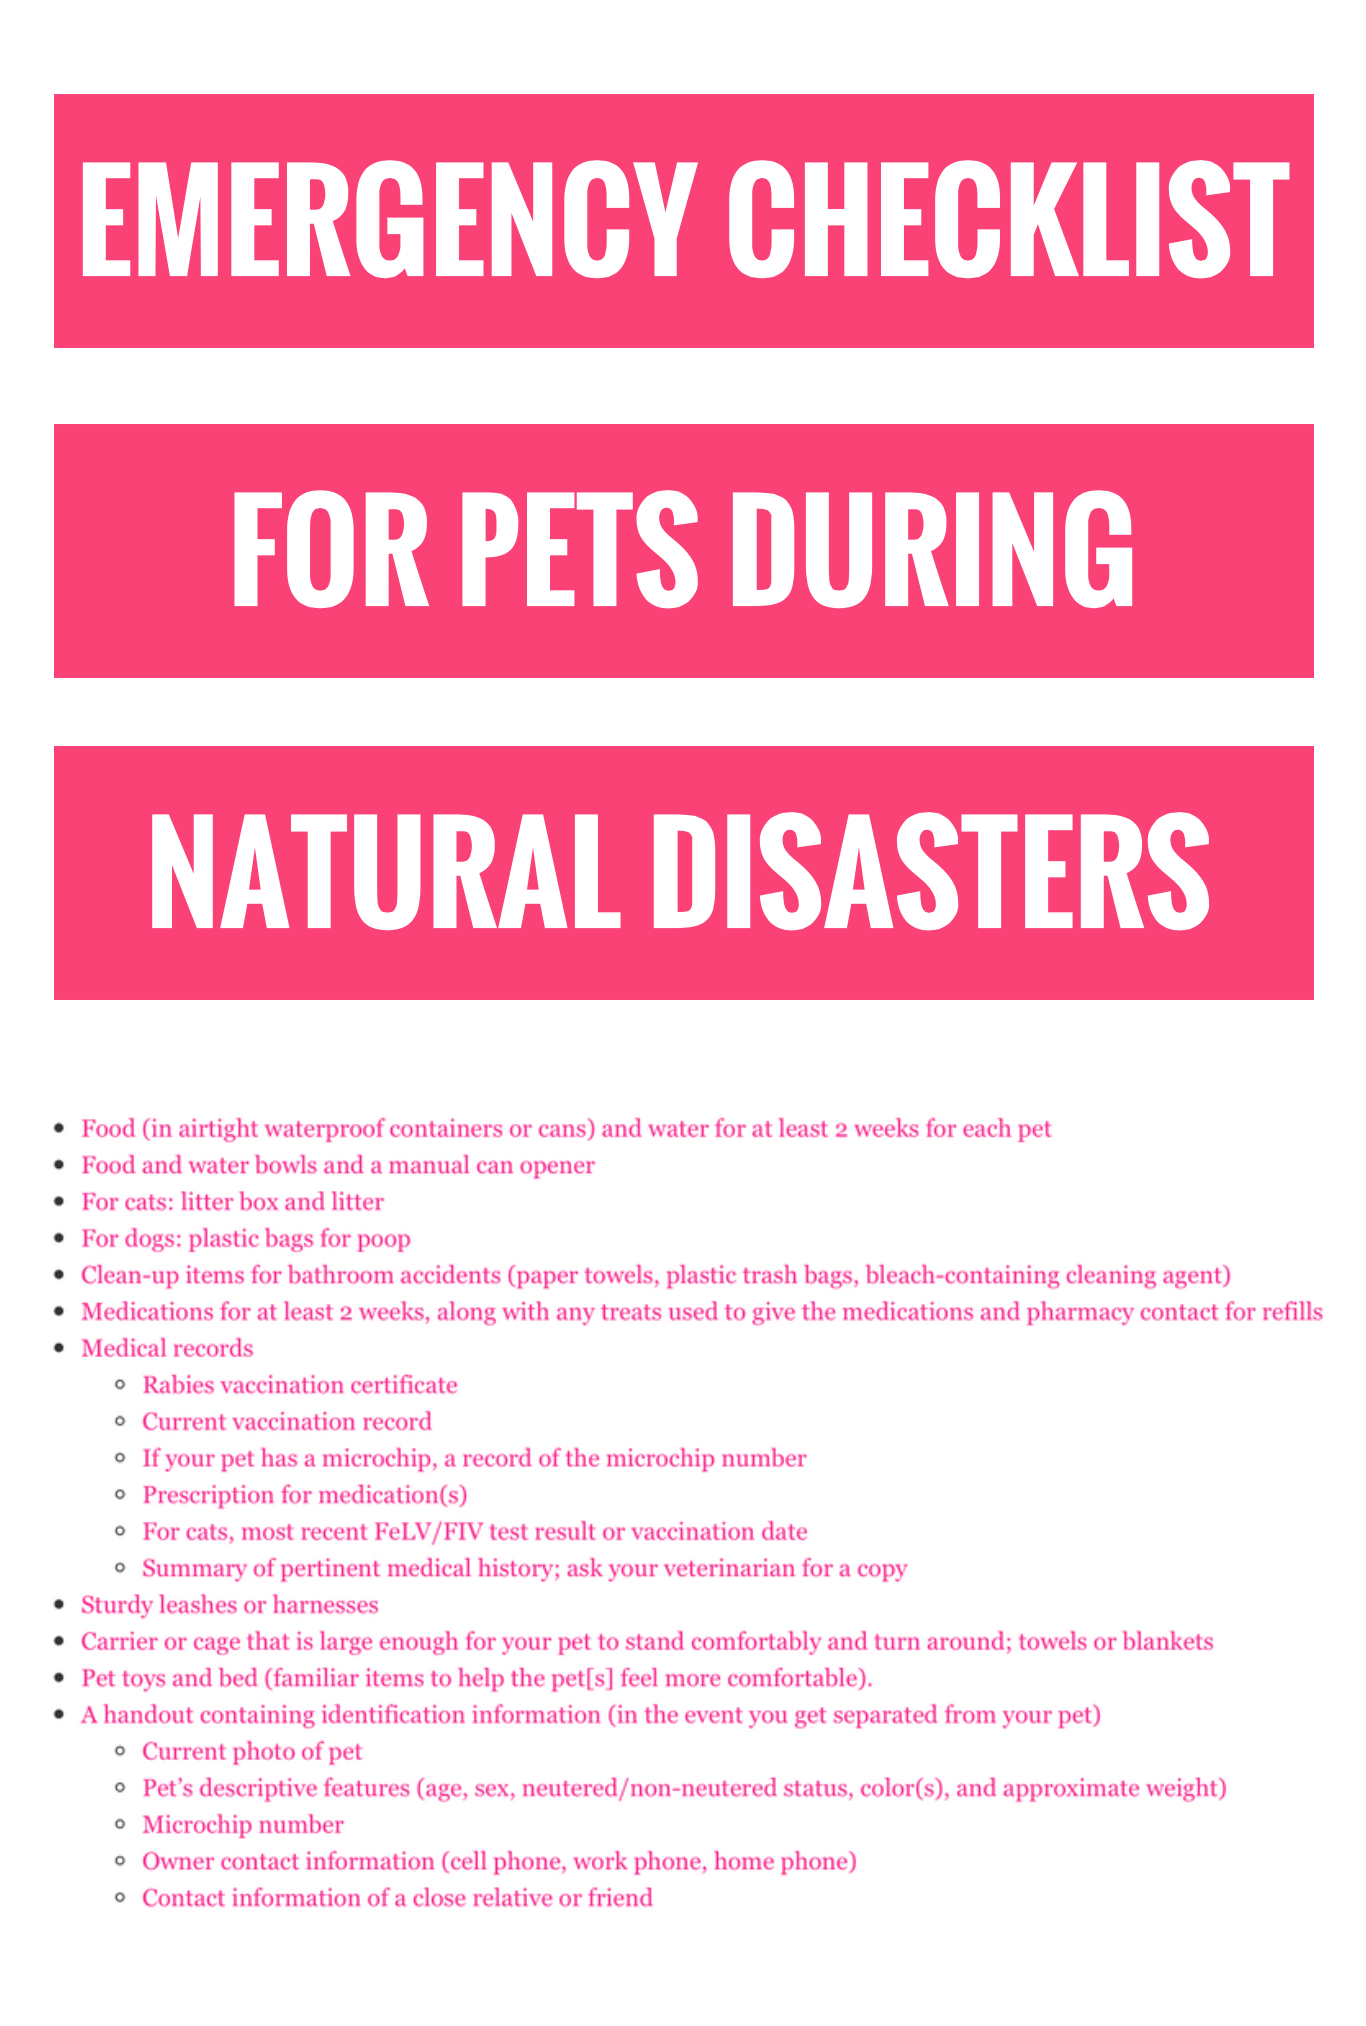 Keeping Your Pet Safe During Natural Disasters